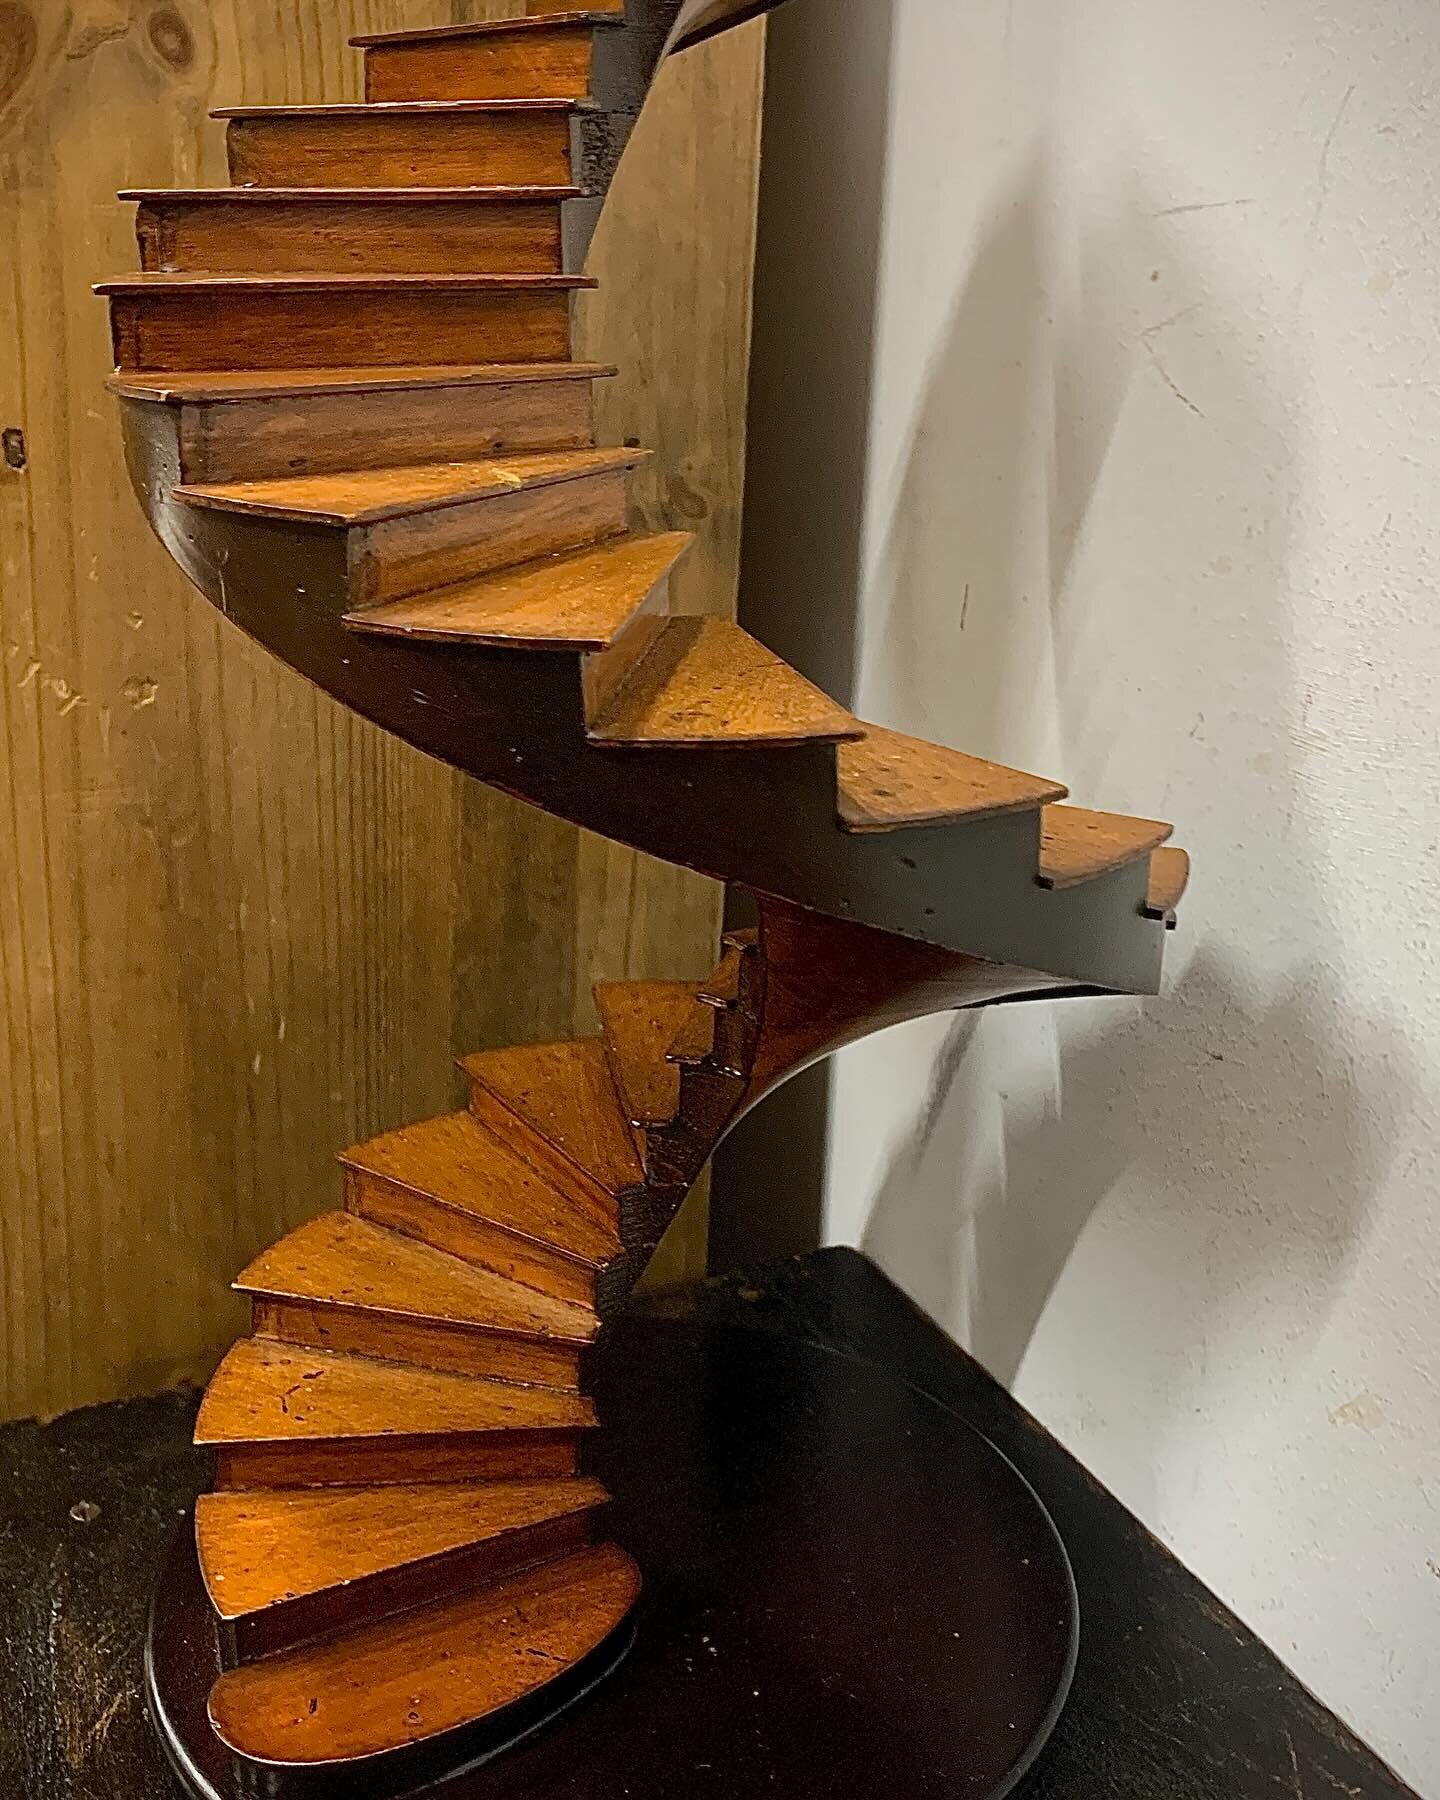 Architectural model of a staircase. Beautifully made thing. Perfectly useless.
#architecture 
#archirecturalmodel 
#craftsmanship 
#treen
#wood
#model